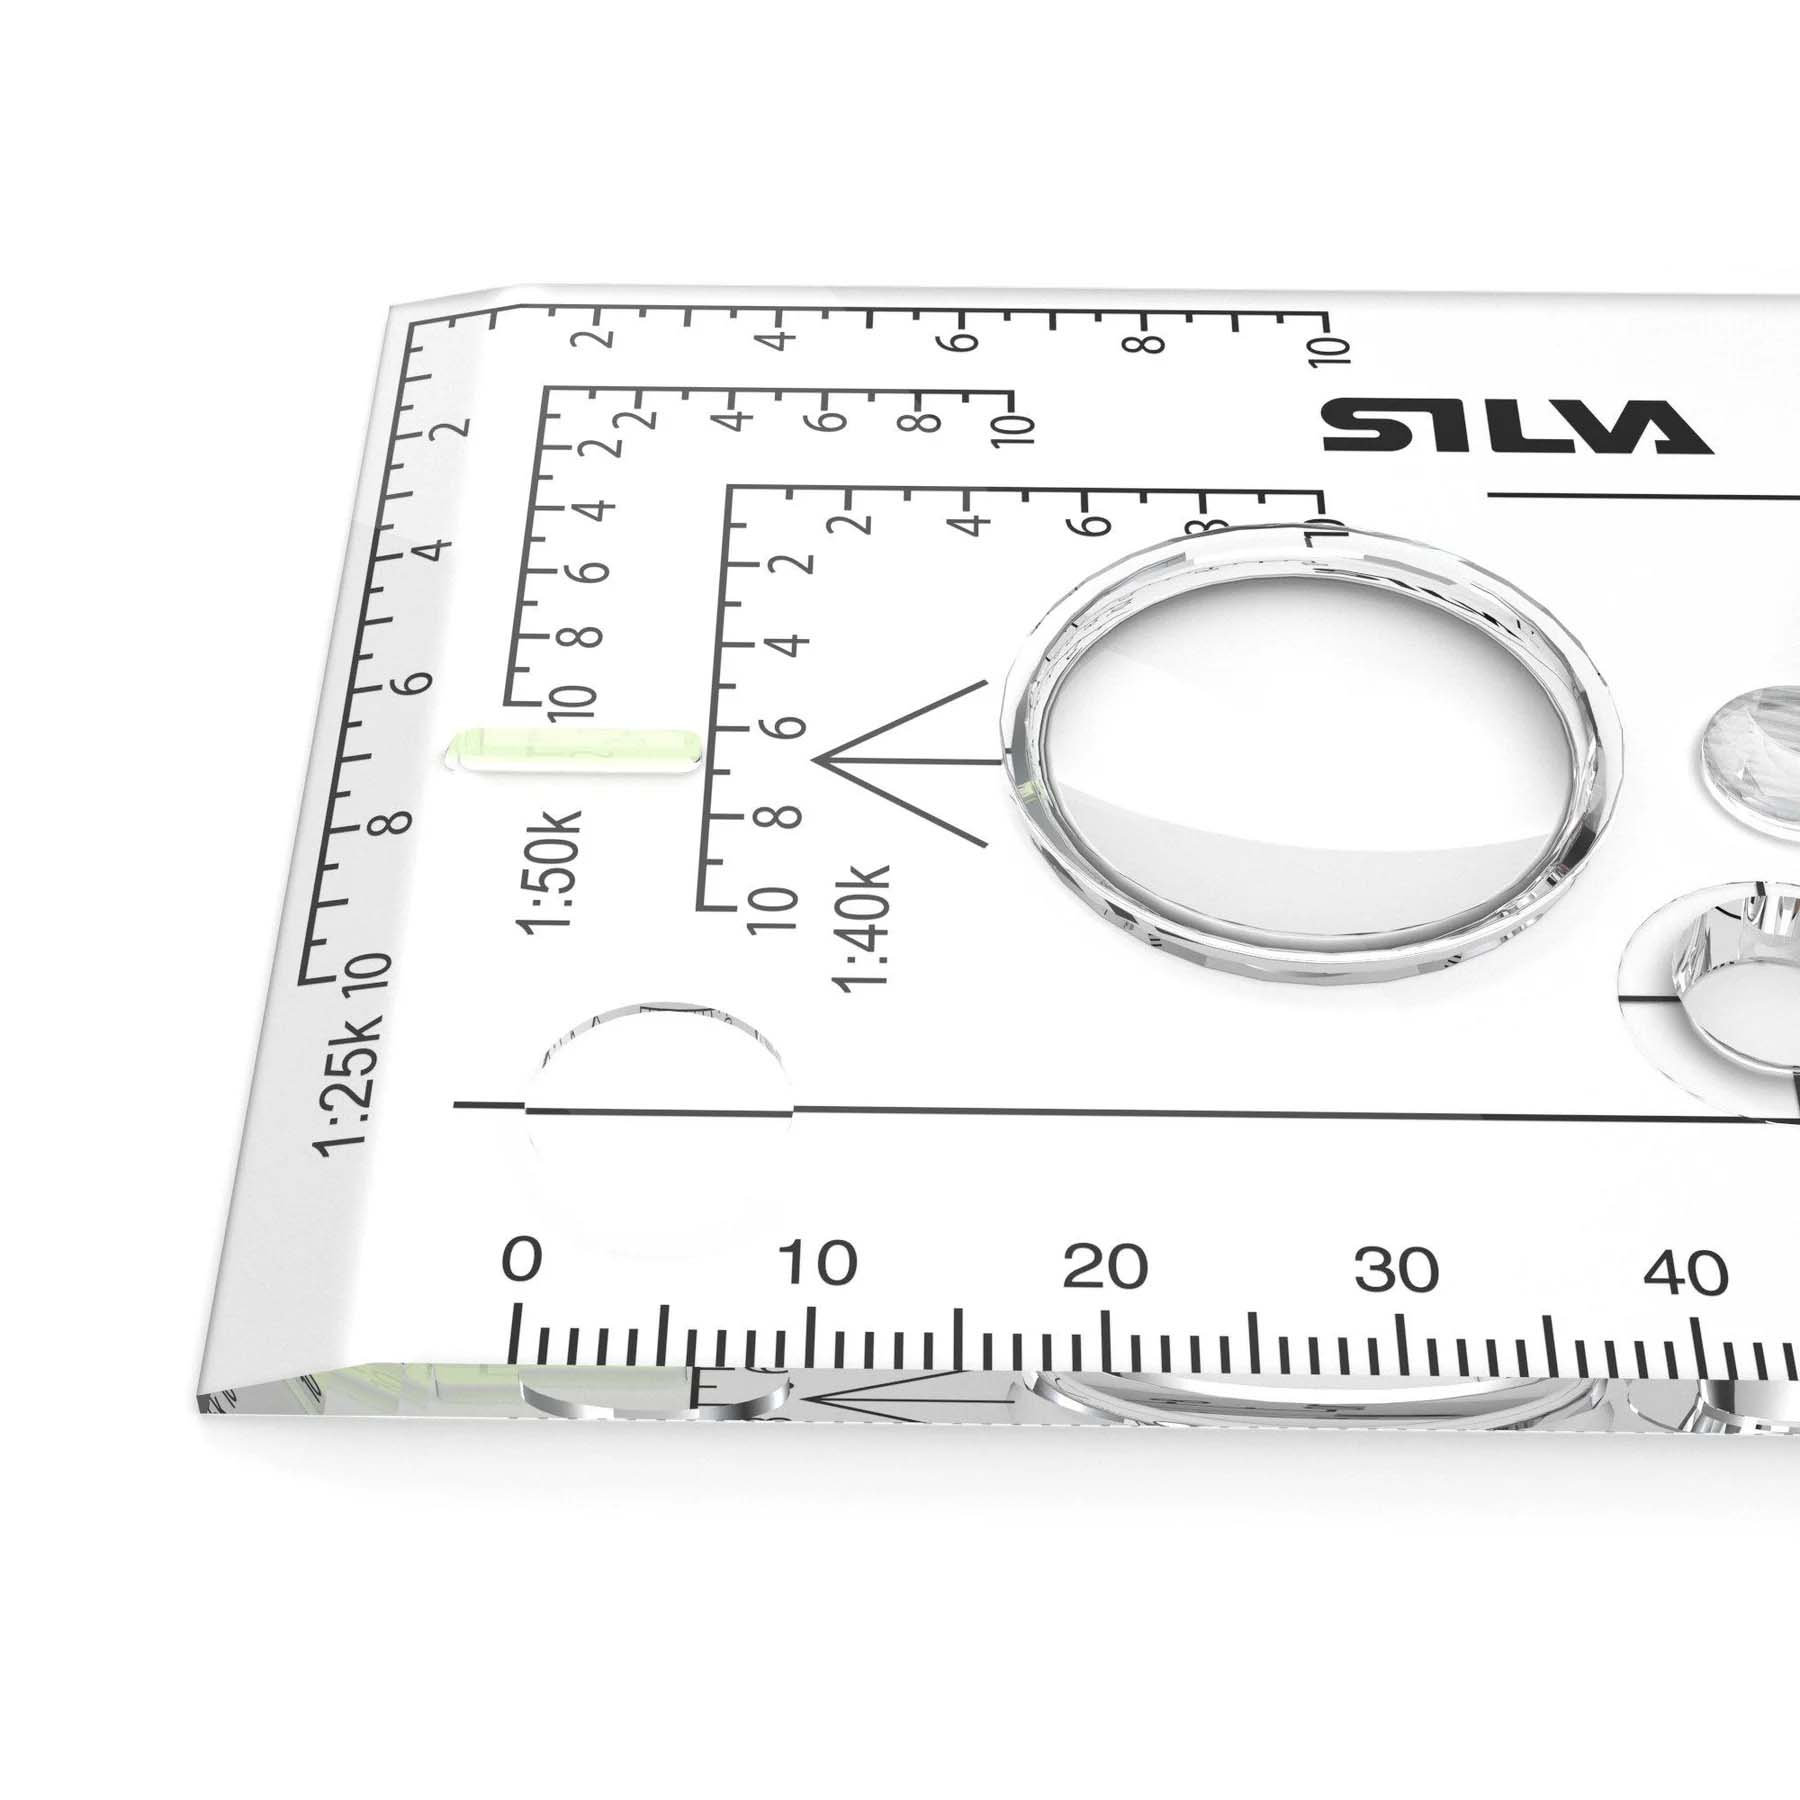 SILVA Expedition 4 Map Reading Compass Aid